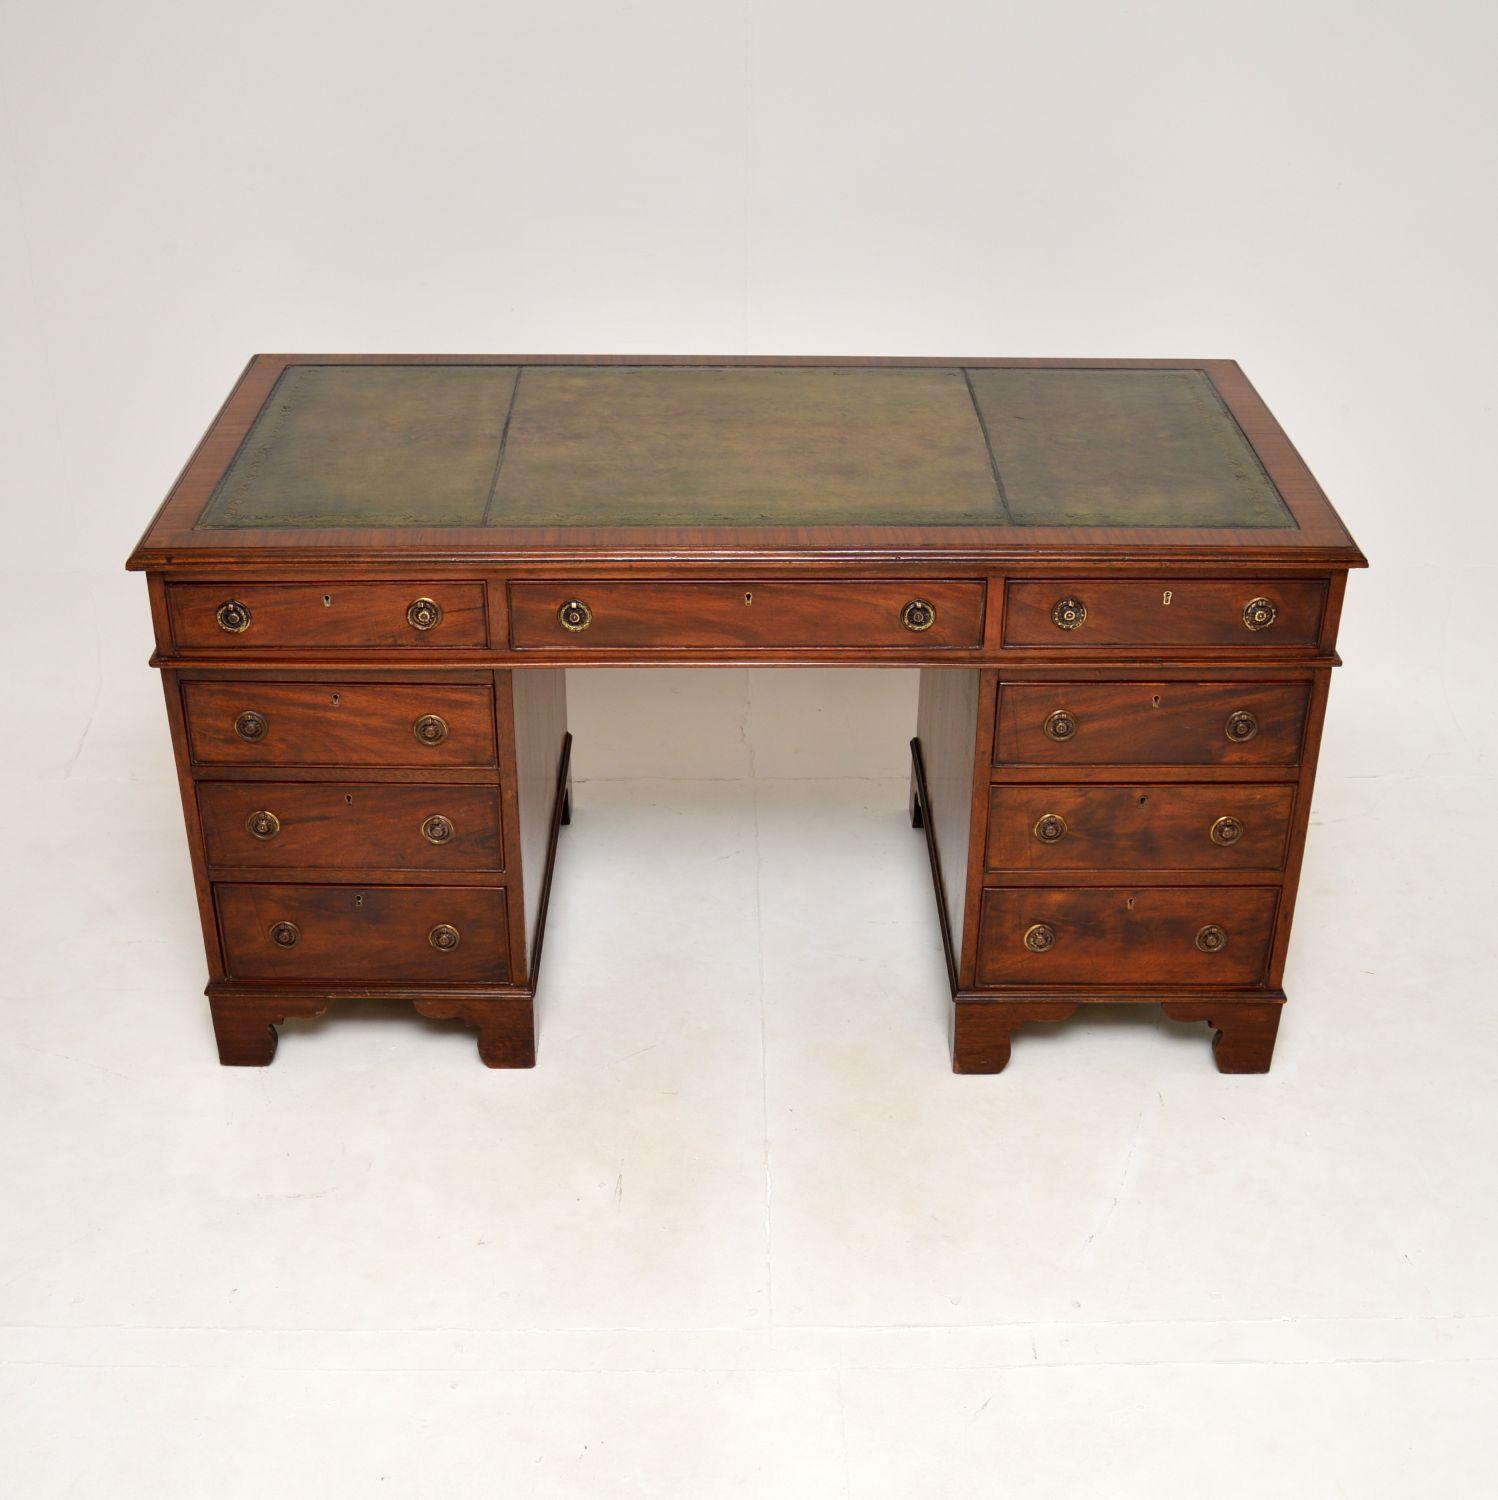 A smart and very impressive antique Georgian leather top pedestal desk. This was made in England, it dates from around the 1800-1820 period.

It is of superb quality and is a great size. It sits on bracket feet and has lovely brass ring pull handles